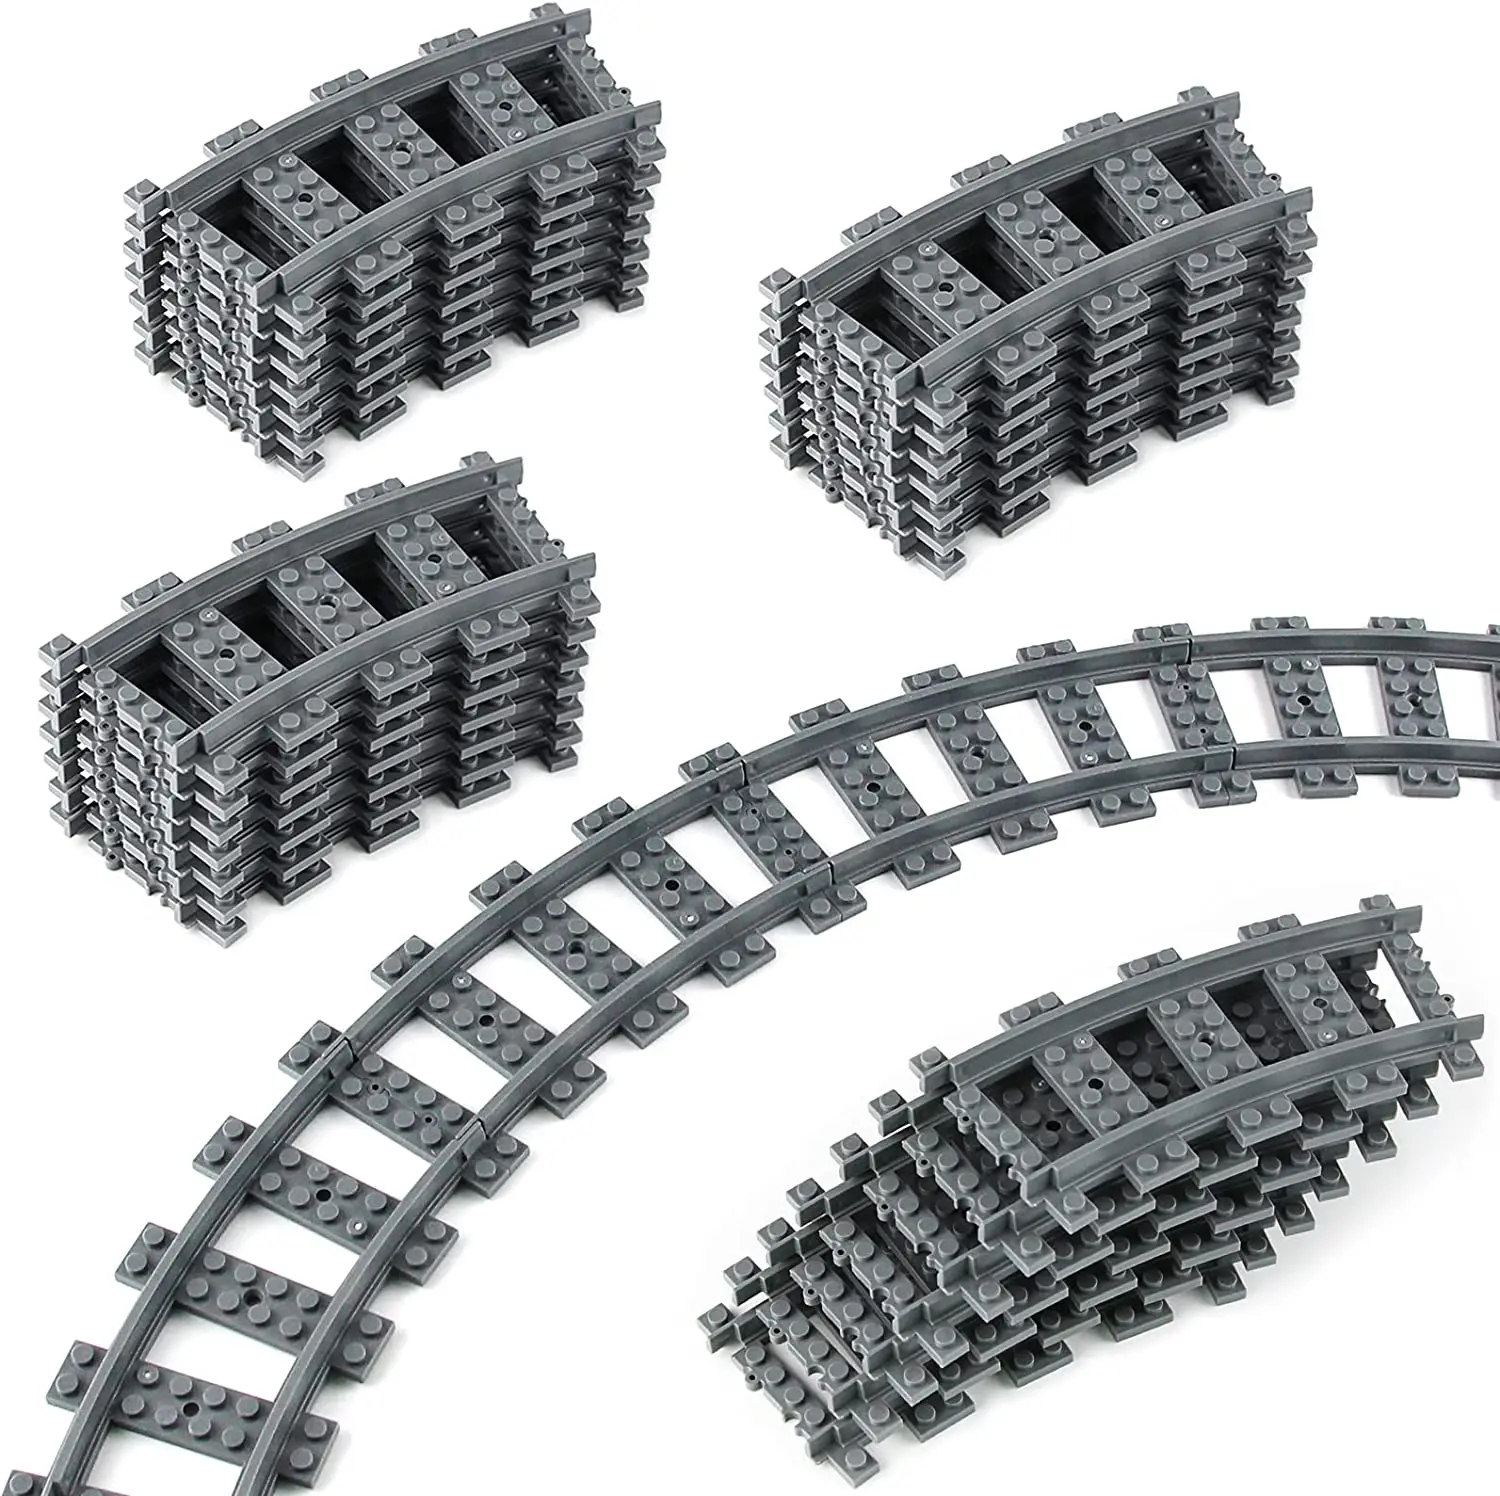 

City Train Track Hands-on Interactive Toy For Kids Gift Compatible Most Railway Brands